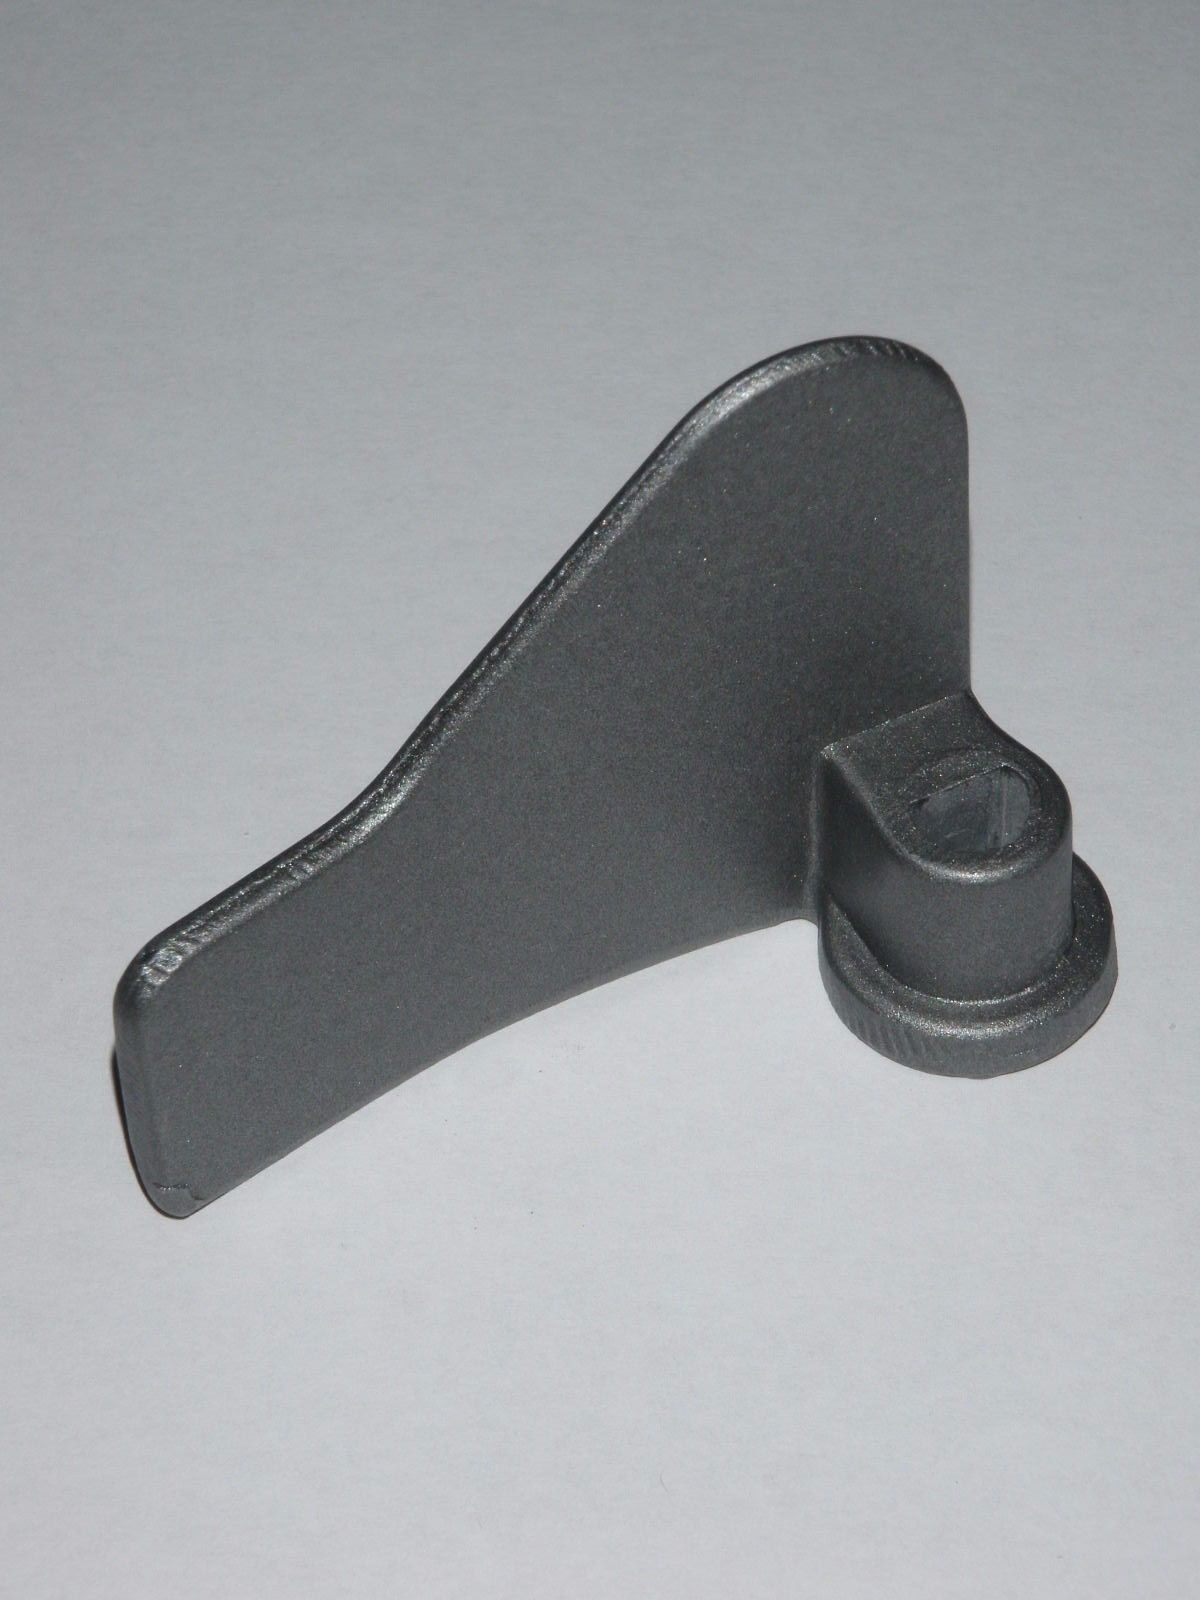 Kneading Blade Paddle for Breville Breadmaker BBM400 Twist N Lock Pan Style (D) - $12.73